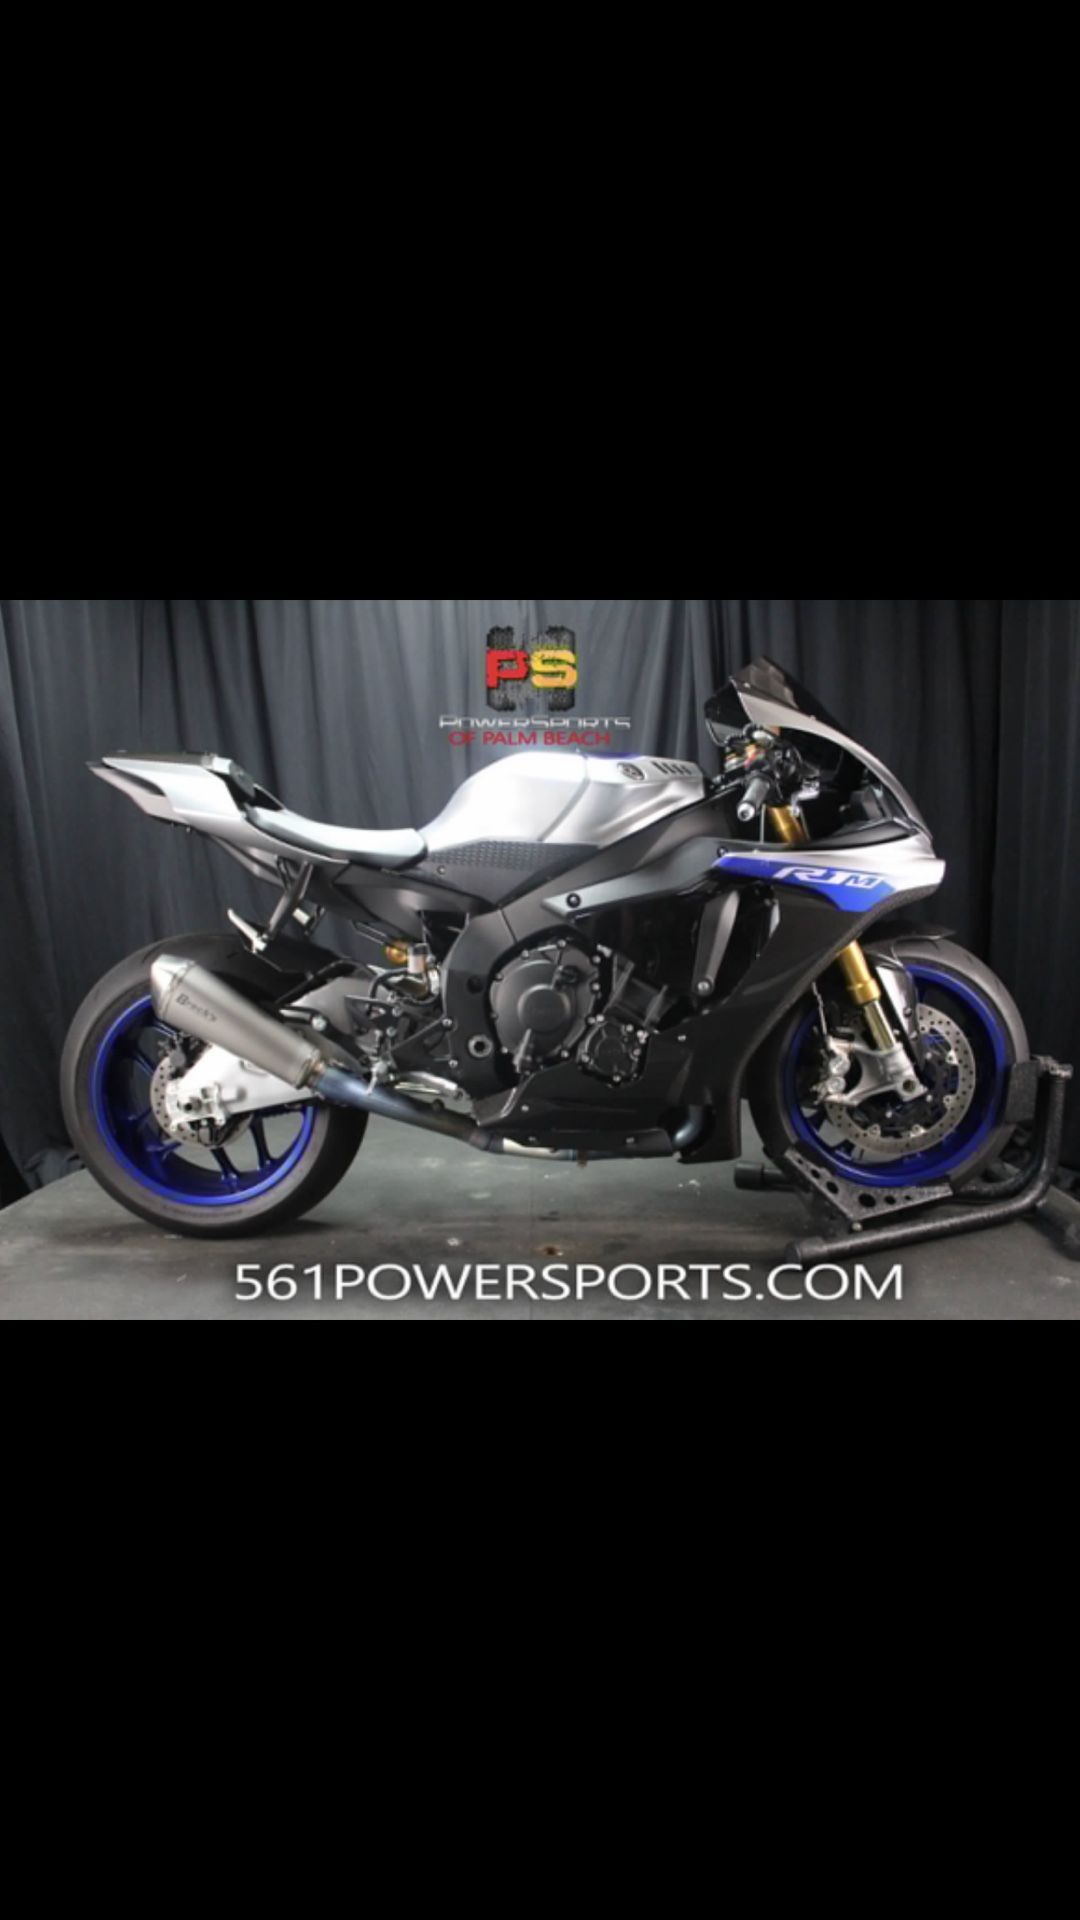 2018 Yamaha R1M r1 yzf r1 - financing available